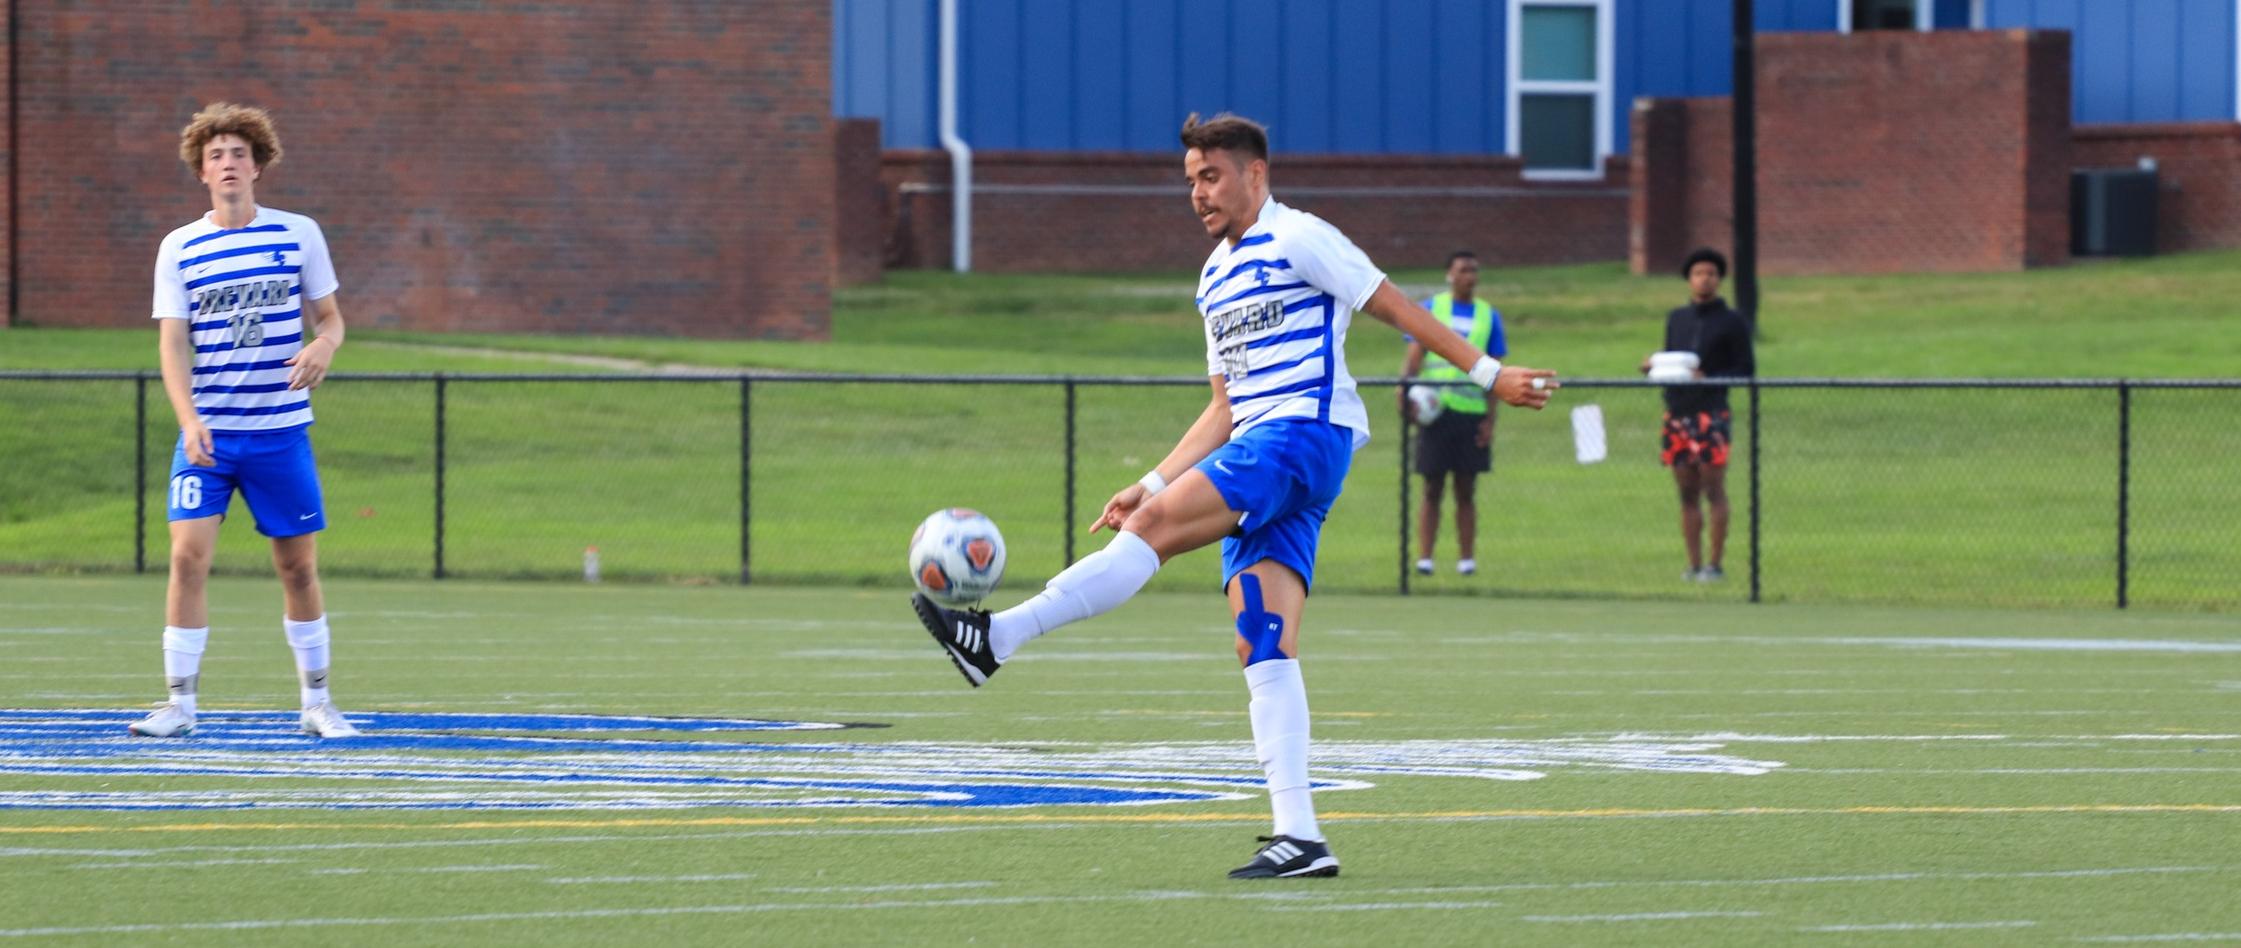 Estevan Berto logged a pair of goals and an assist as the Tornados cruised past Southern Virginia, 4-0 (Photo courtesy of Victoria Brayman '22).